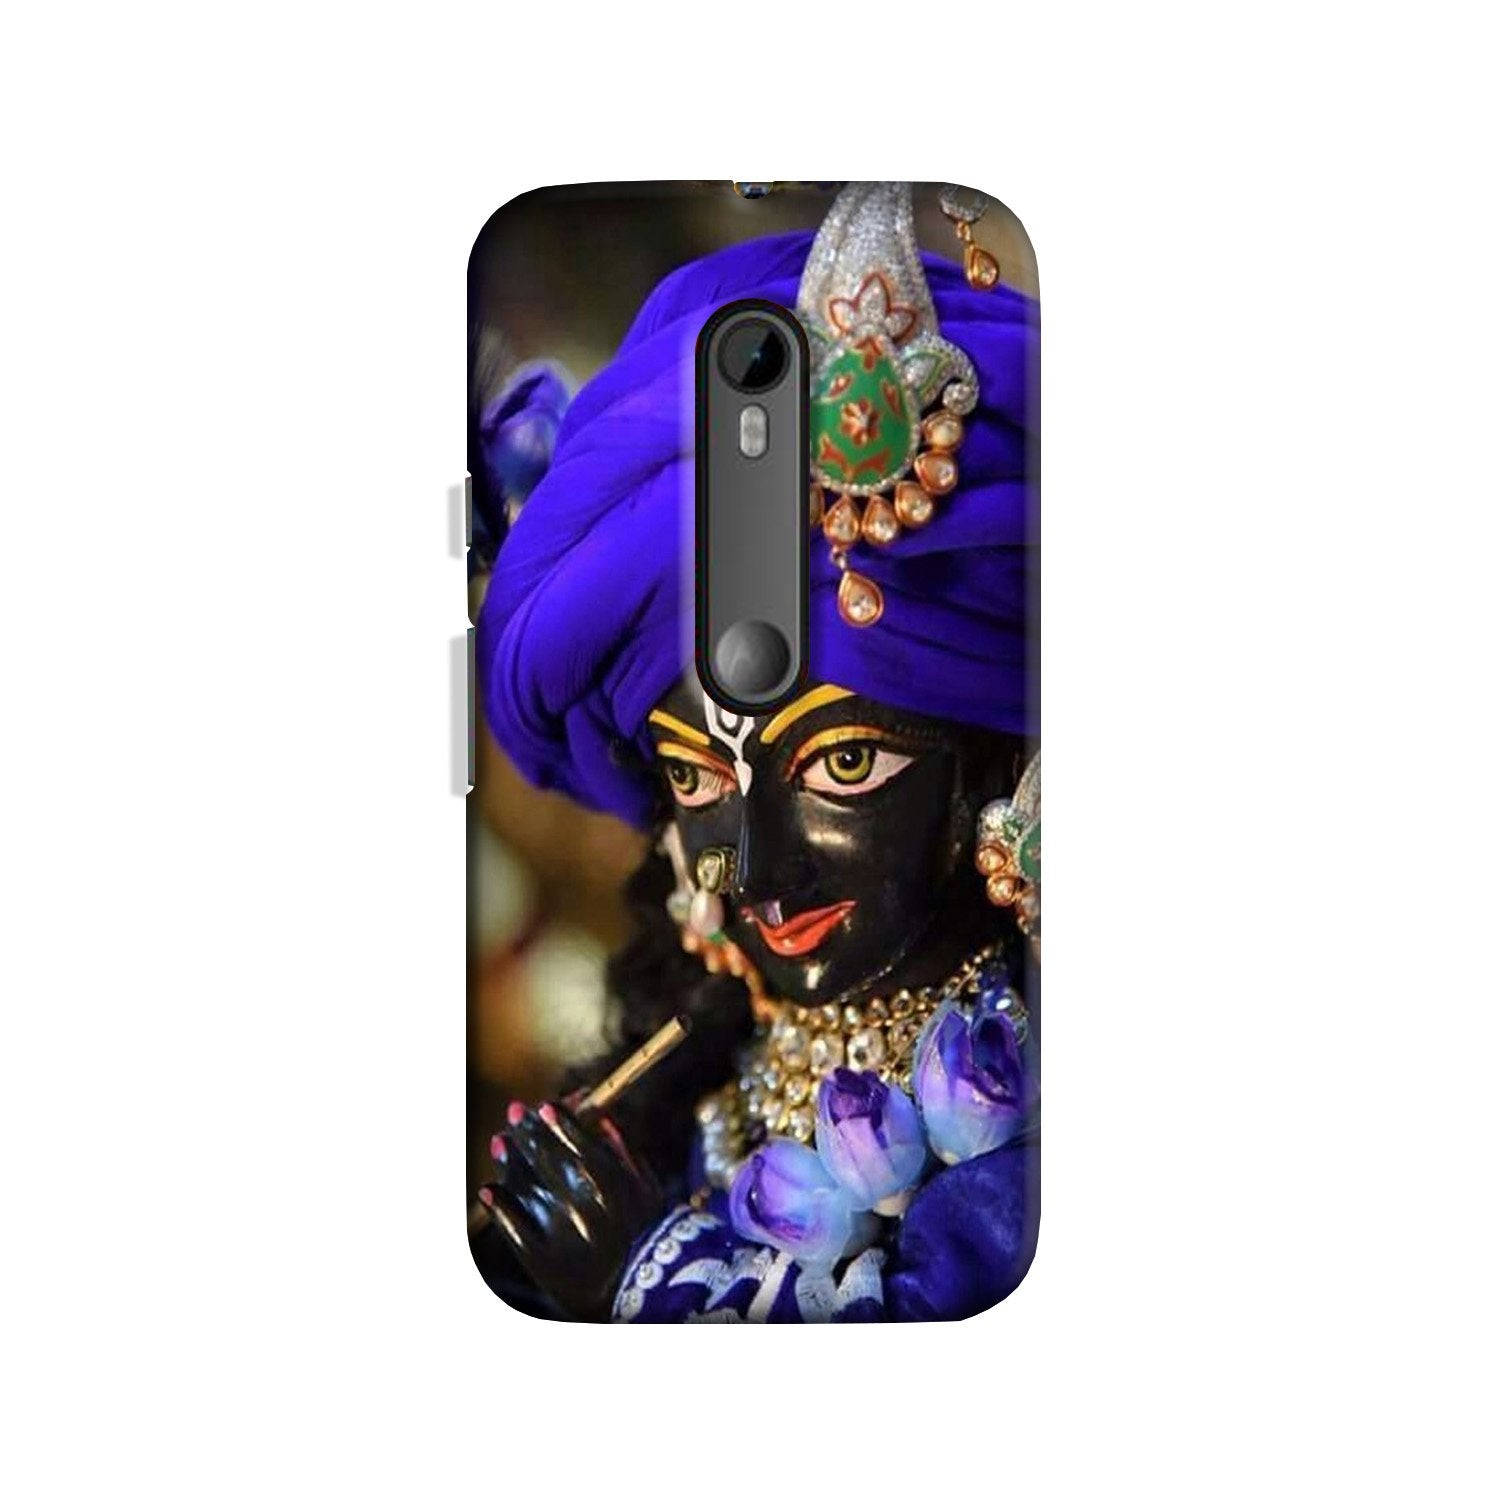 Lord Krishna4 Case for Moto X Style